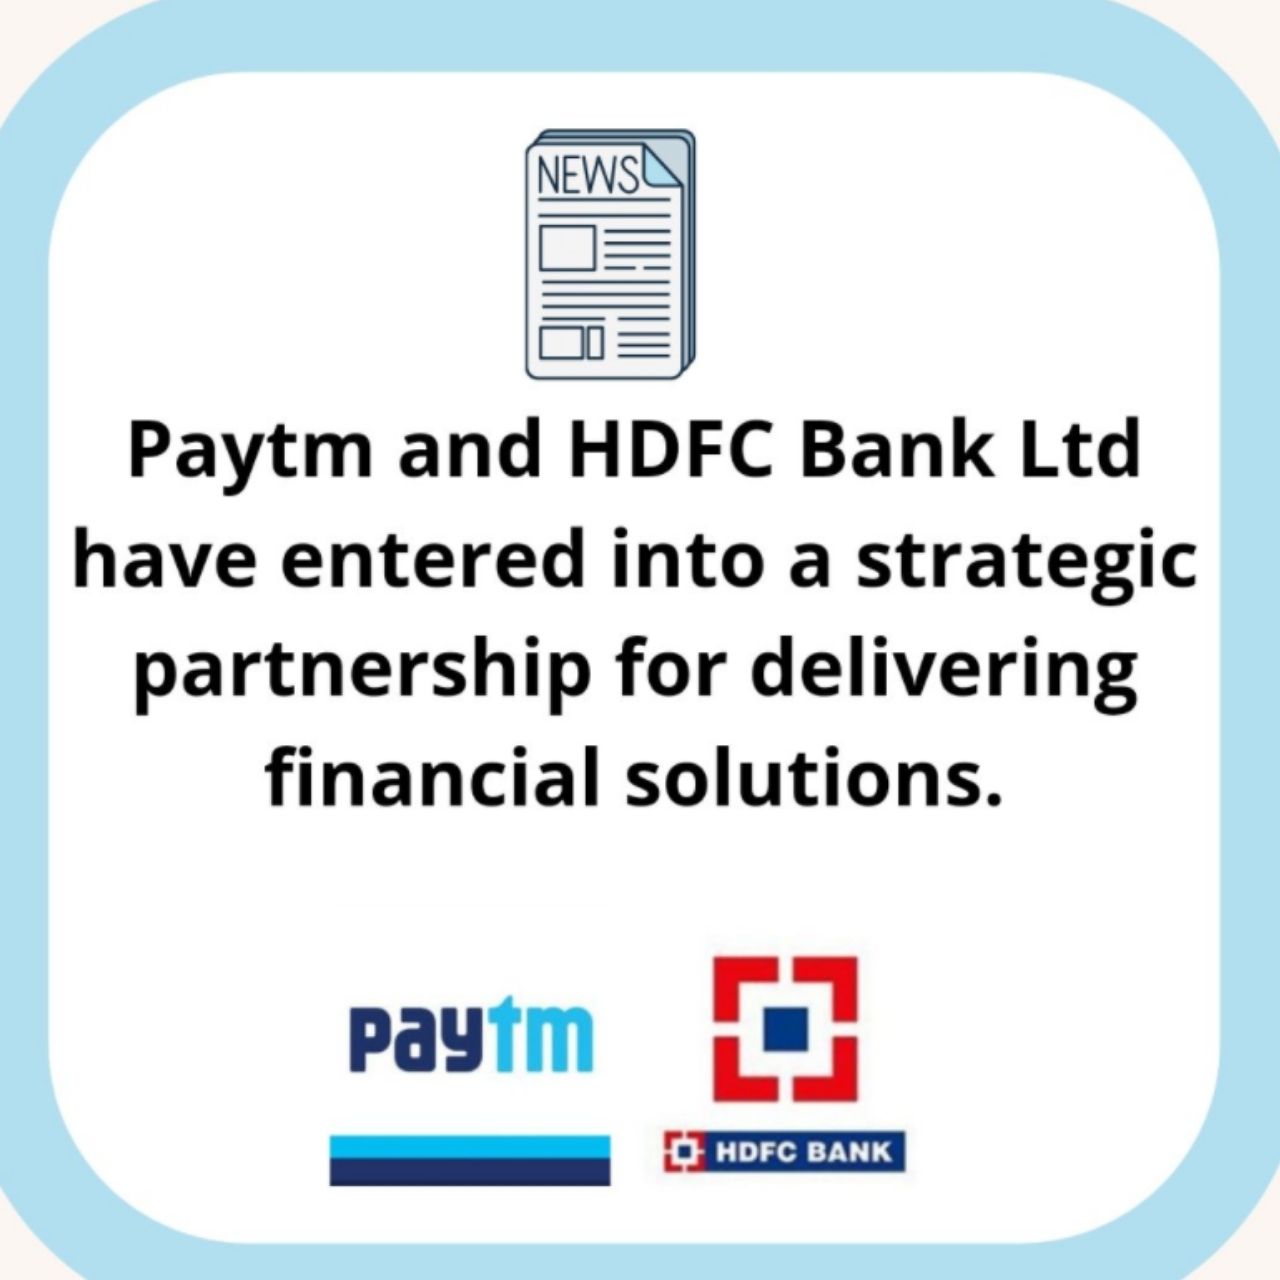 Good news for HDFC customers will launch a new range of credit cards in association with Paytm ahead of the festive season